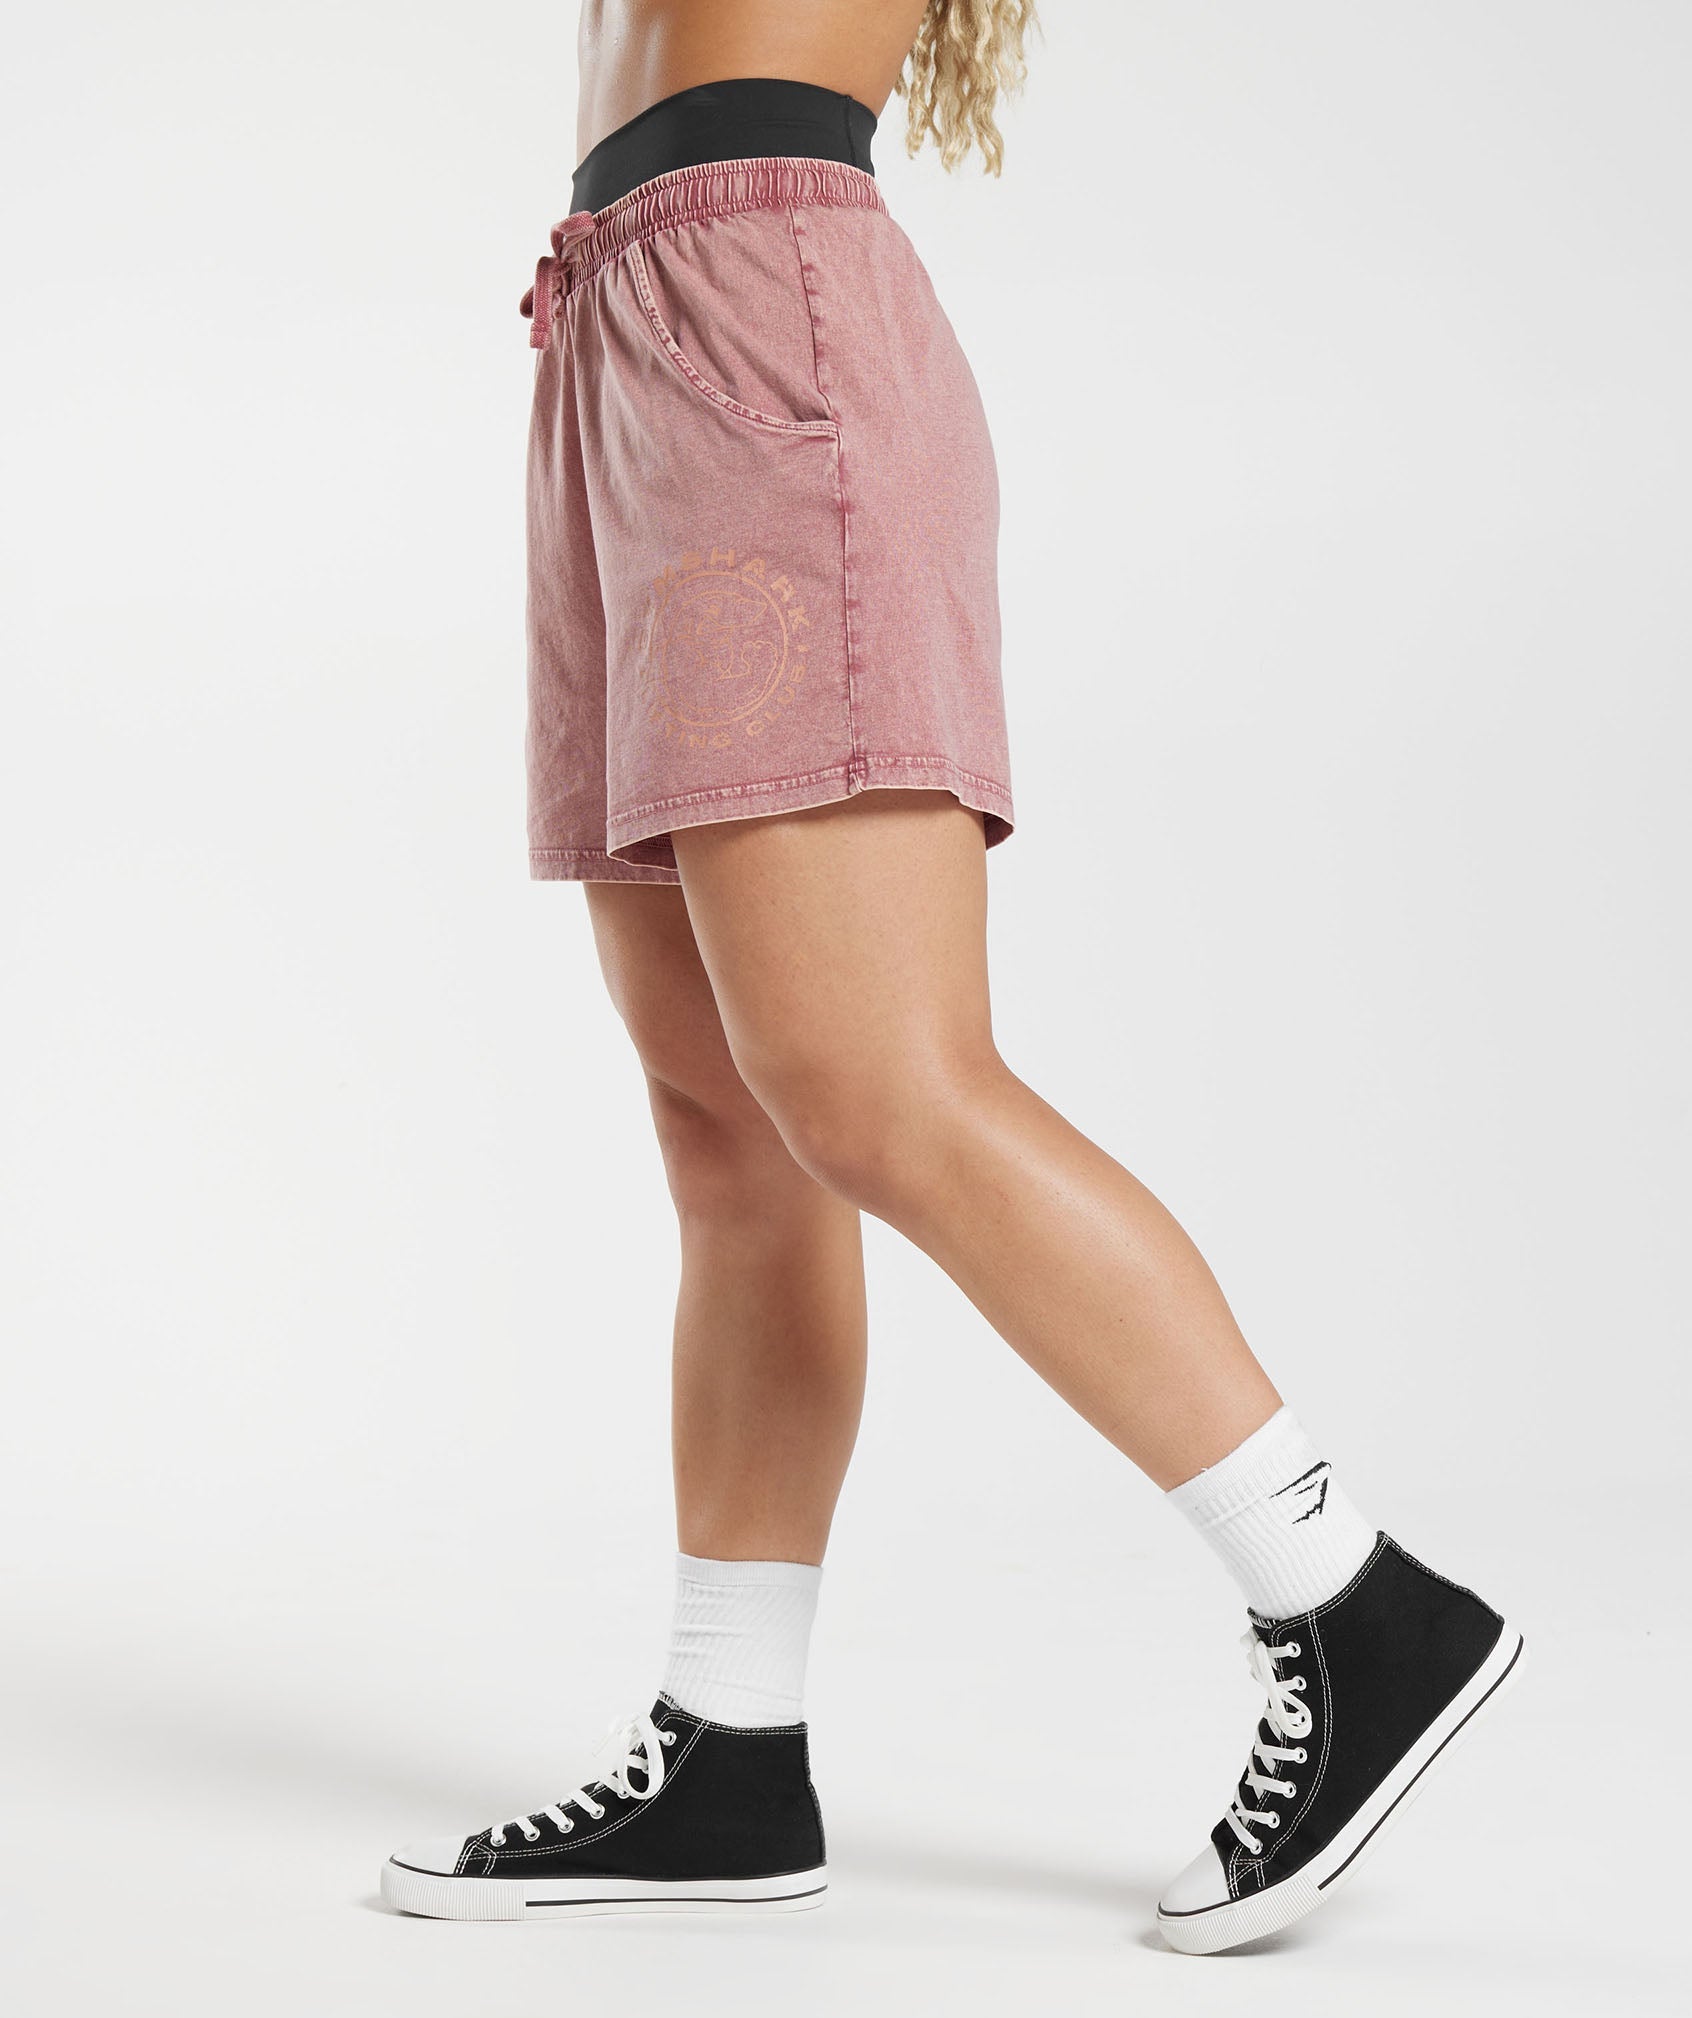 Legacy Loose Shorts in Terracotta Pink/Acid Wash